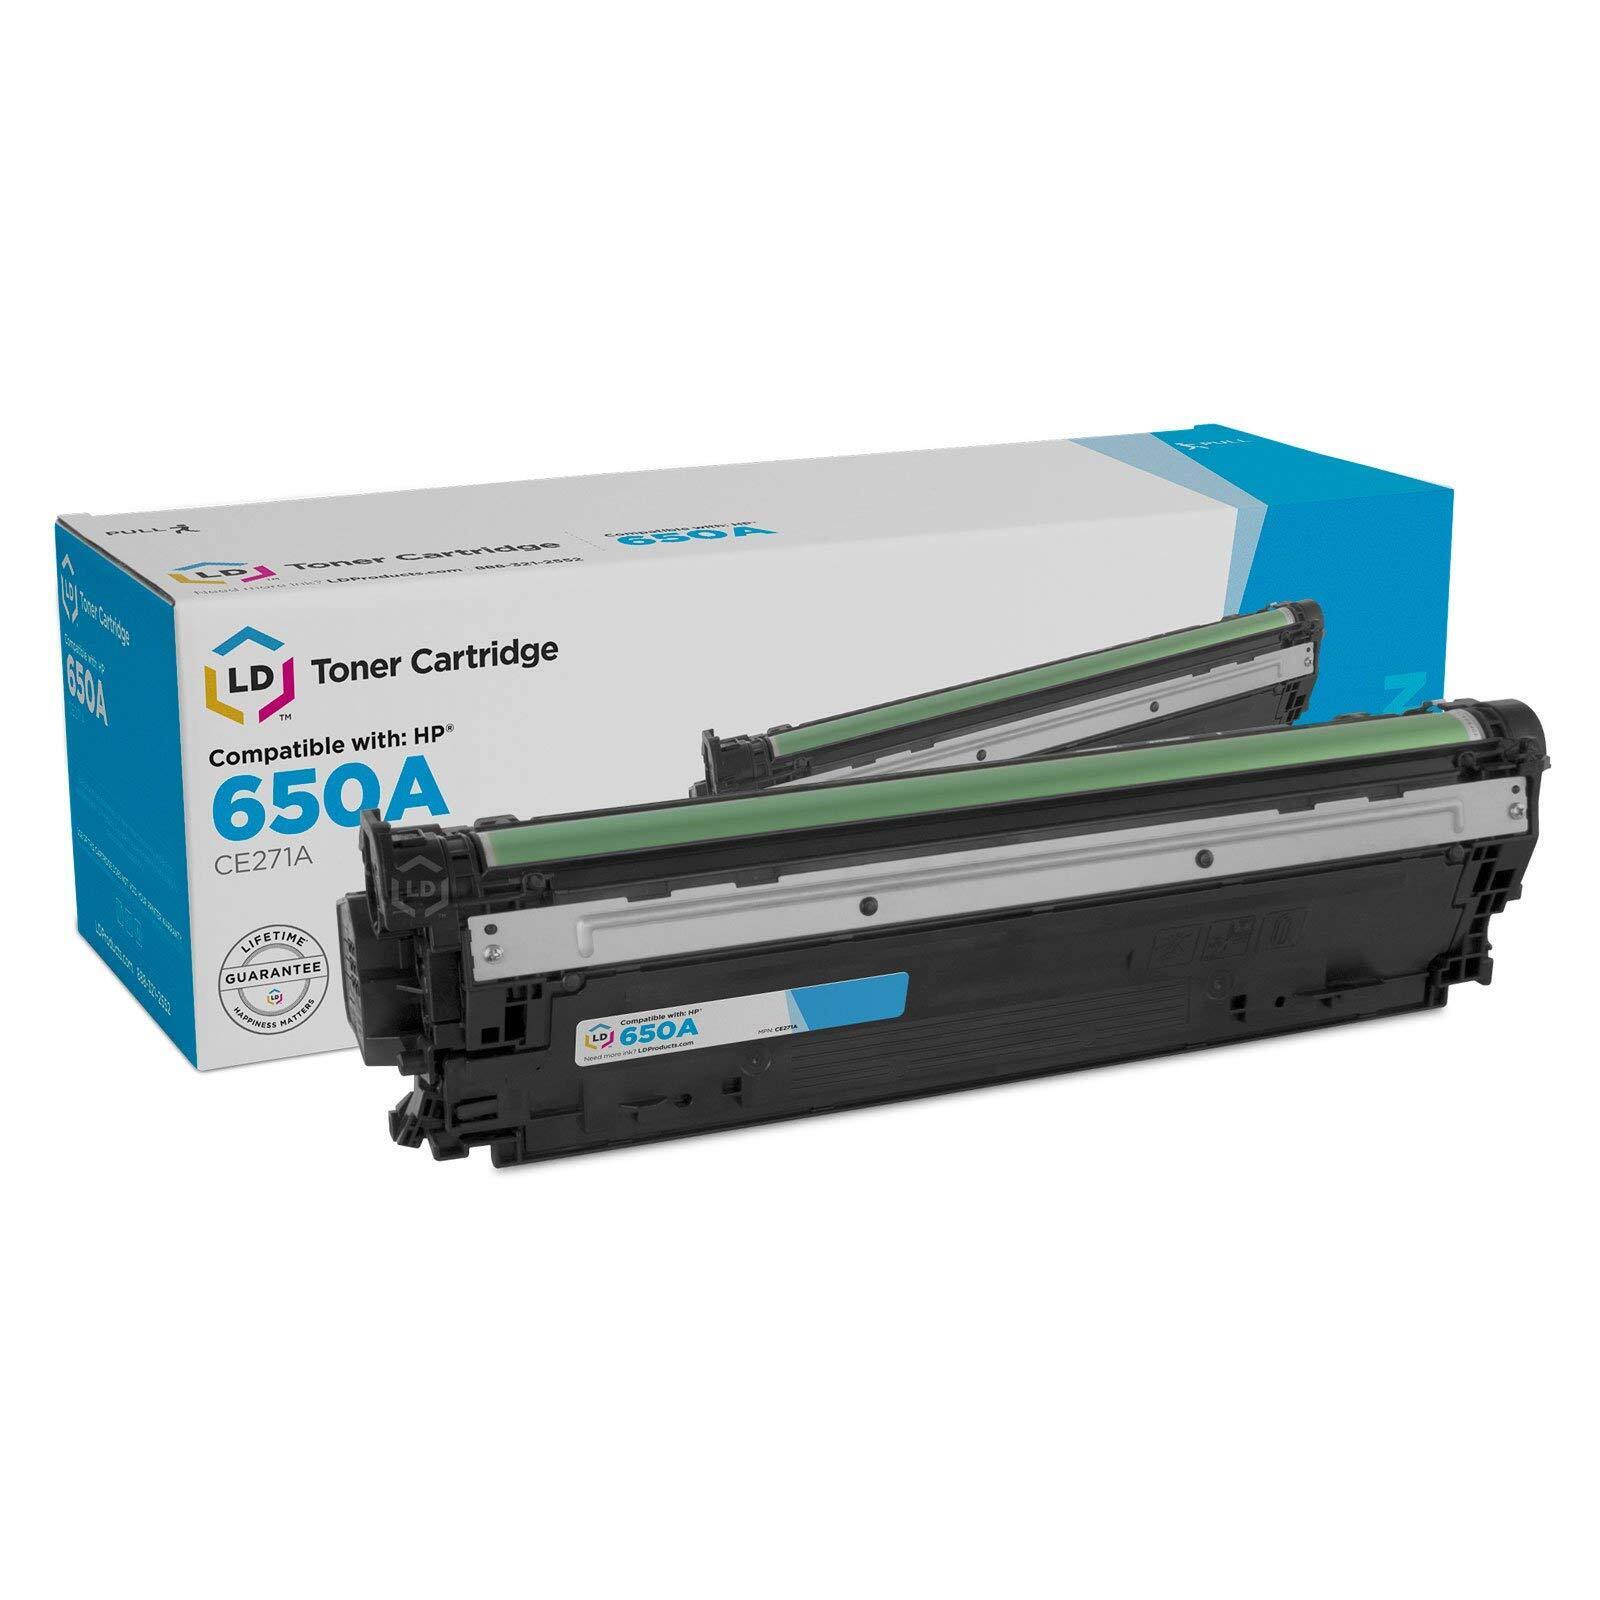 LD Products Replacement for HP 650A / CE271A Cyan Laser Toner Cartridge